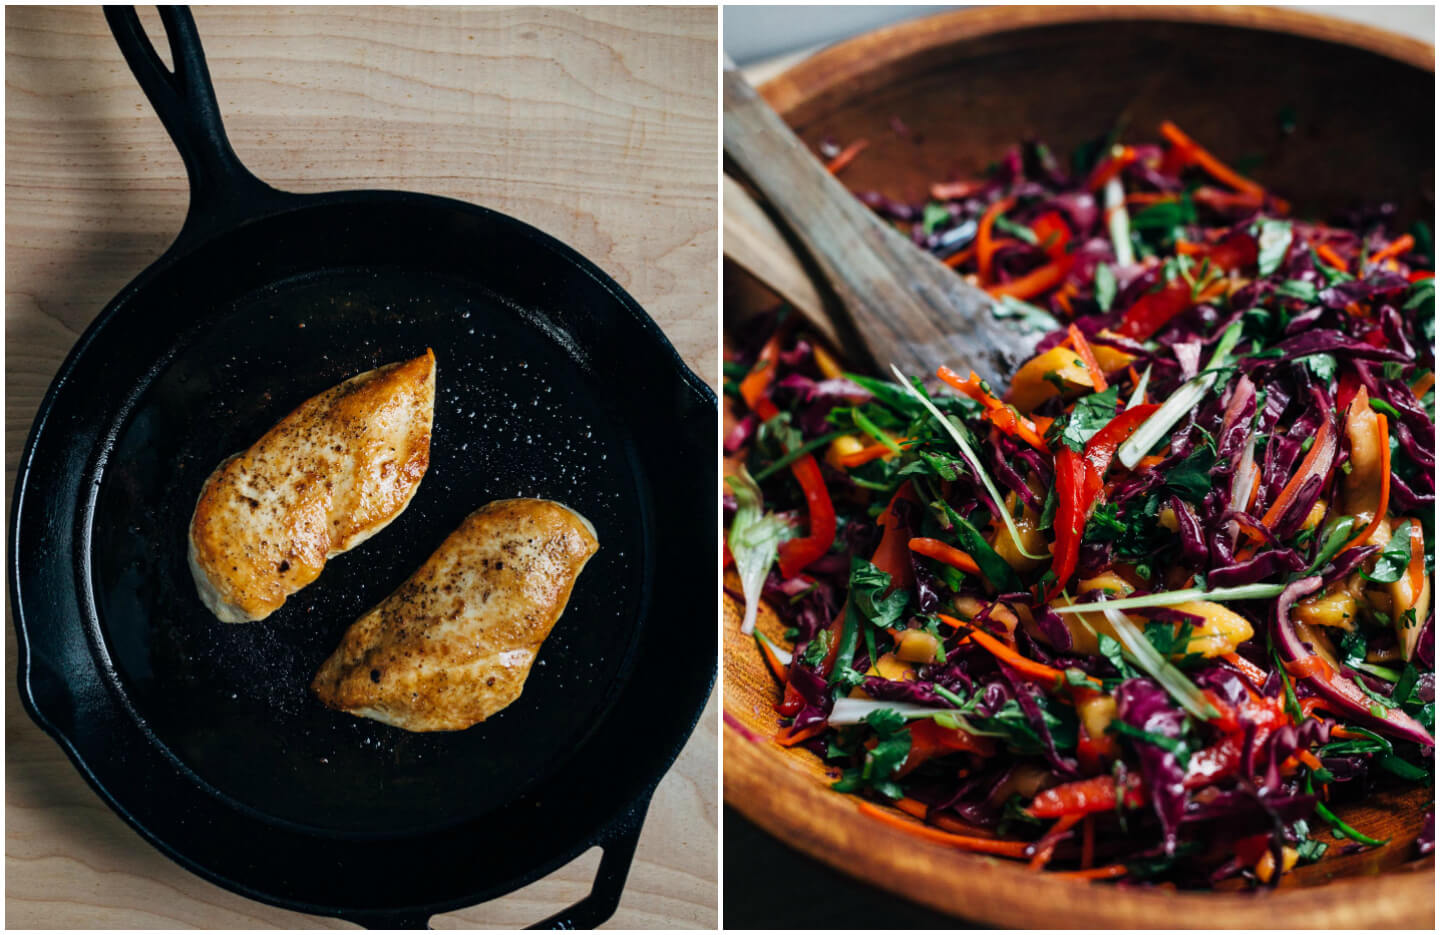 Inspired by Thai flavors, this meal prep chicken features juicy pan-seared chicken breast is served alongside a vibrant red cabbage and mango slaw and sticky jasmine rice.